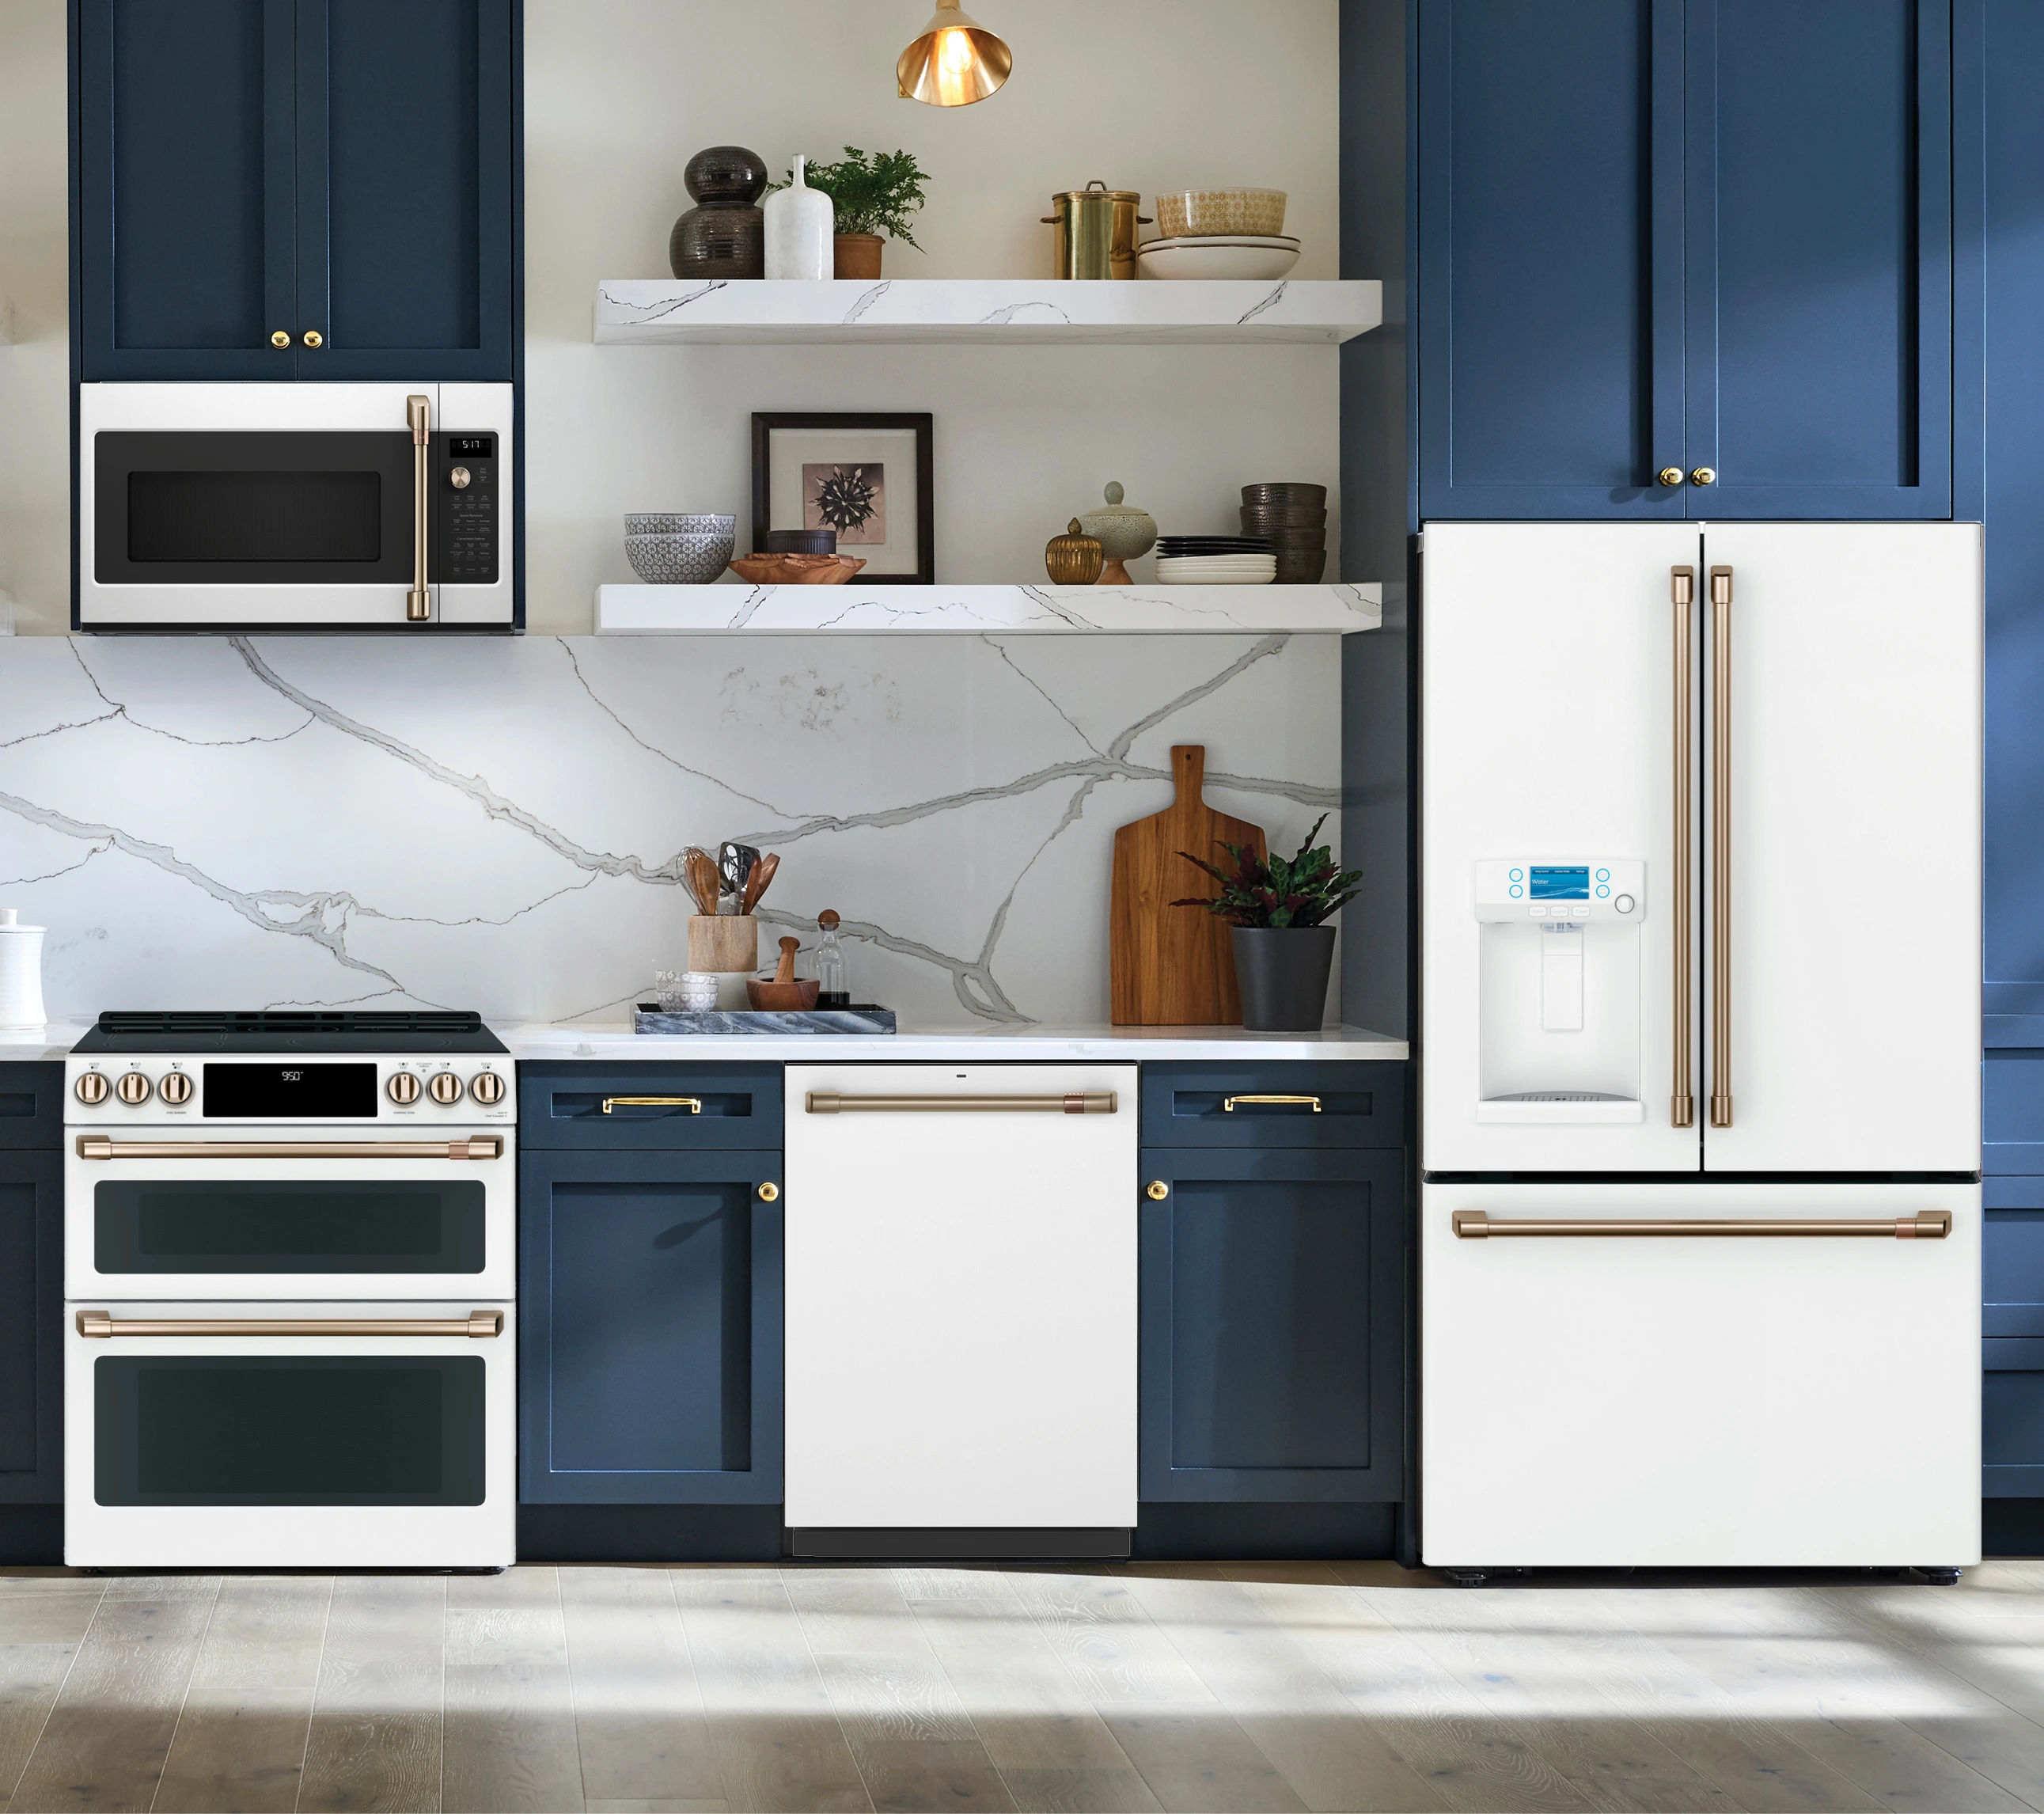 GE's new Cafe appliance line features The Matte Collection